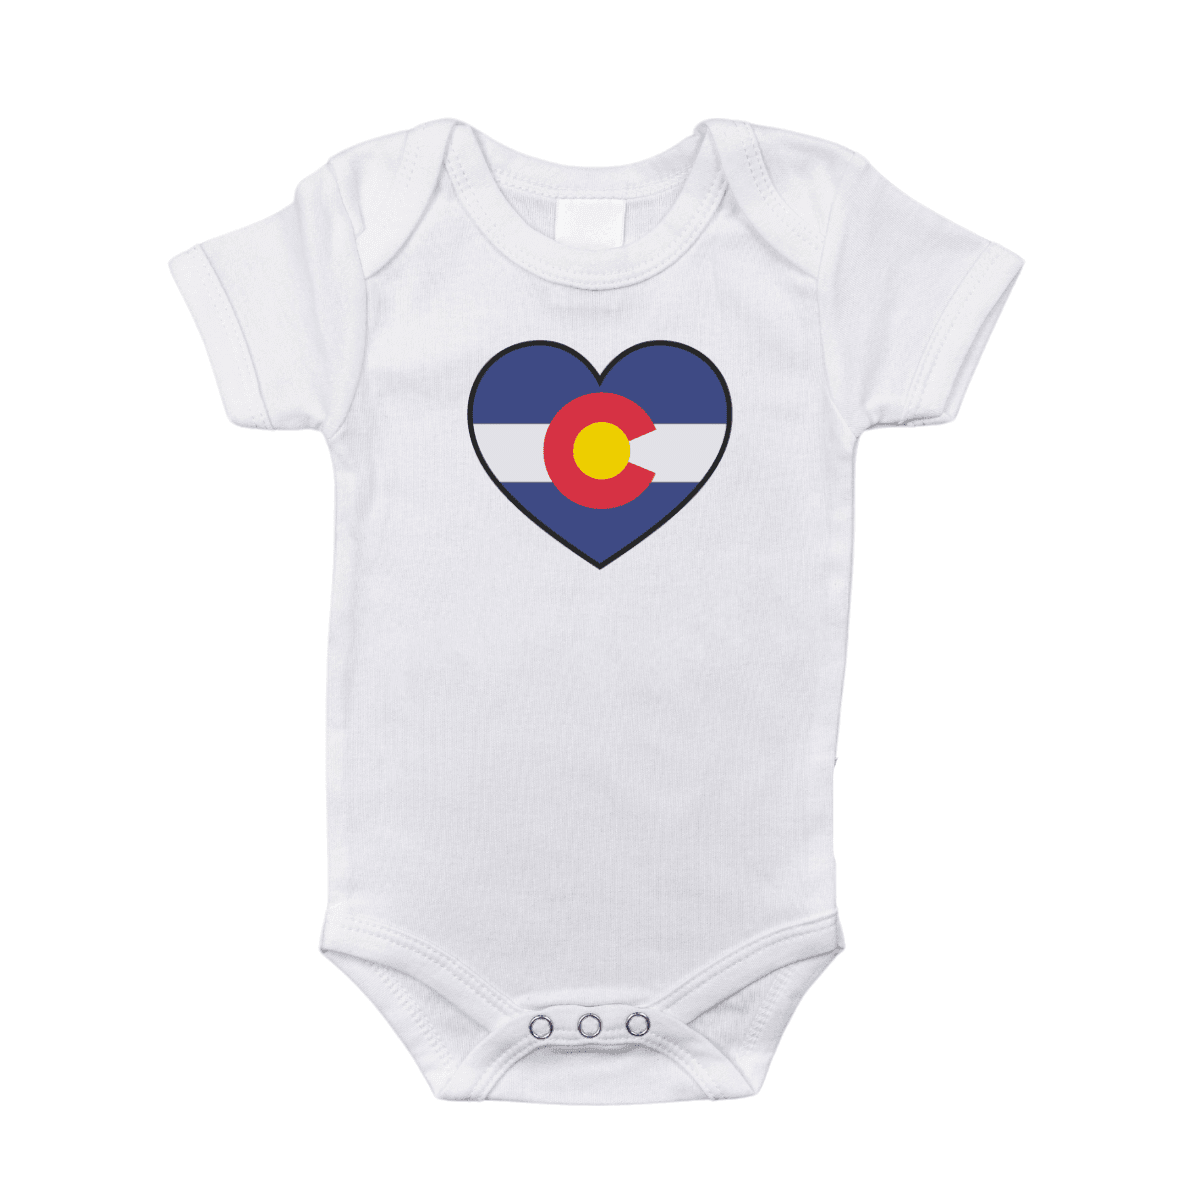 White baby onesie with "Colorado" and a mountain graphic in blue, featuring "Little Hometown" text below.